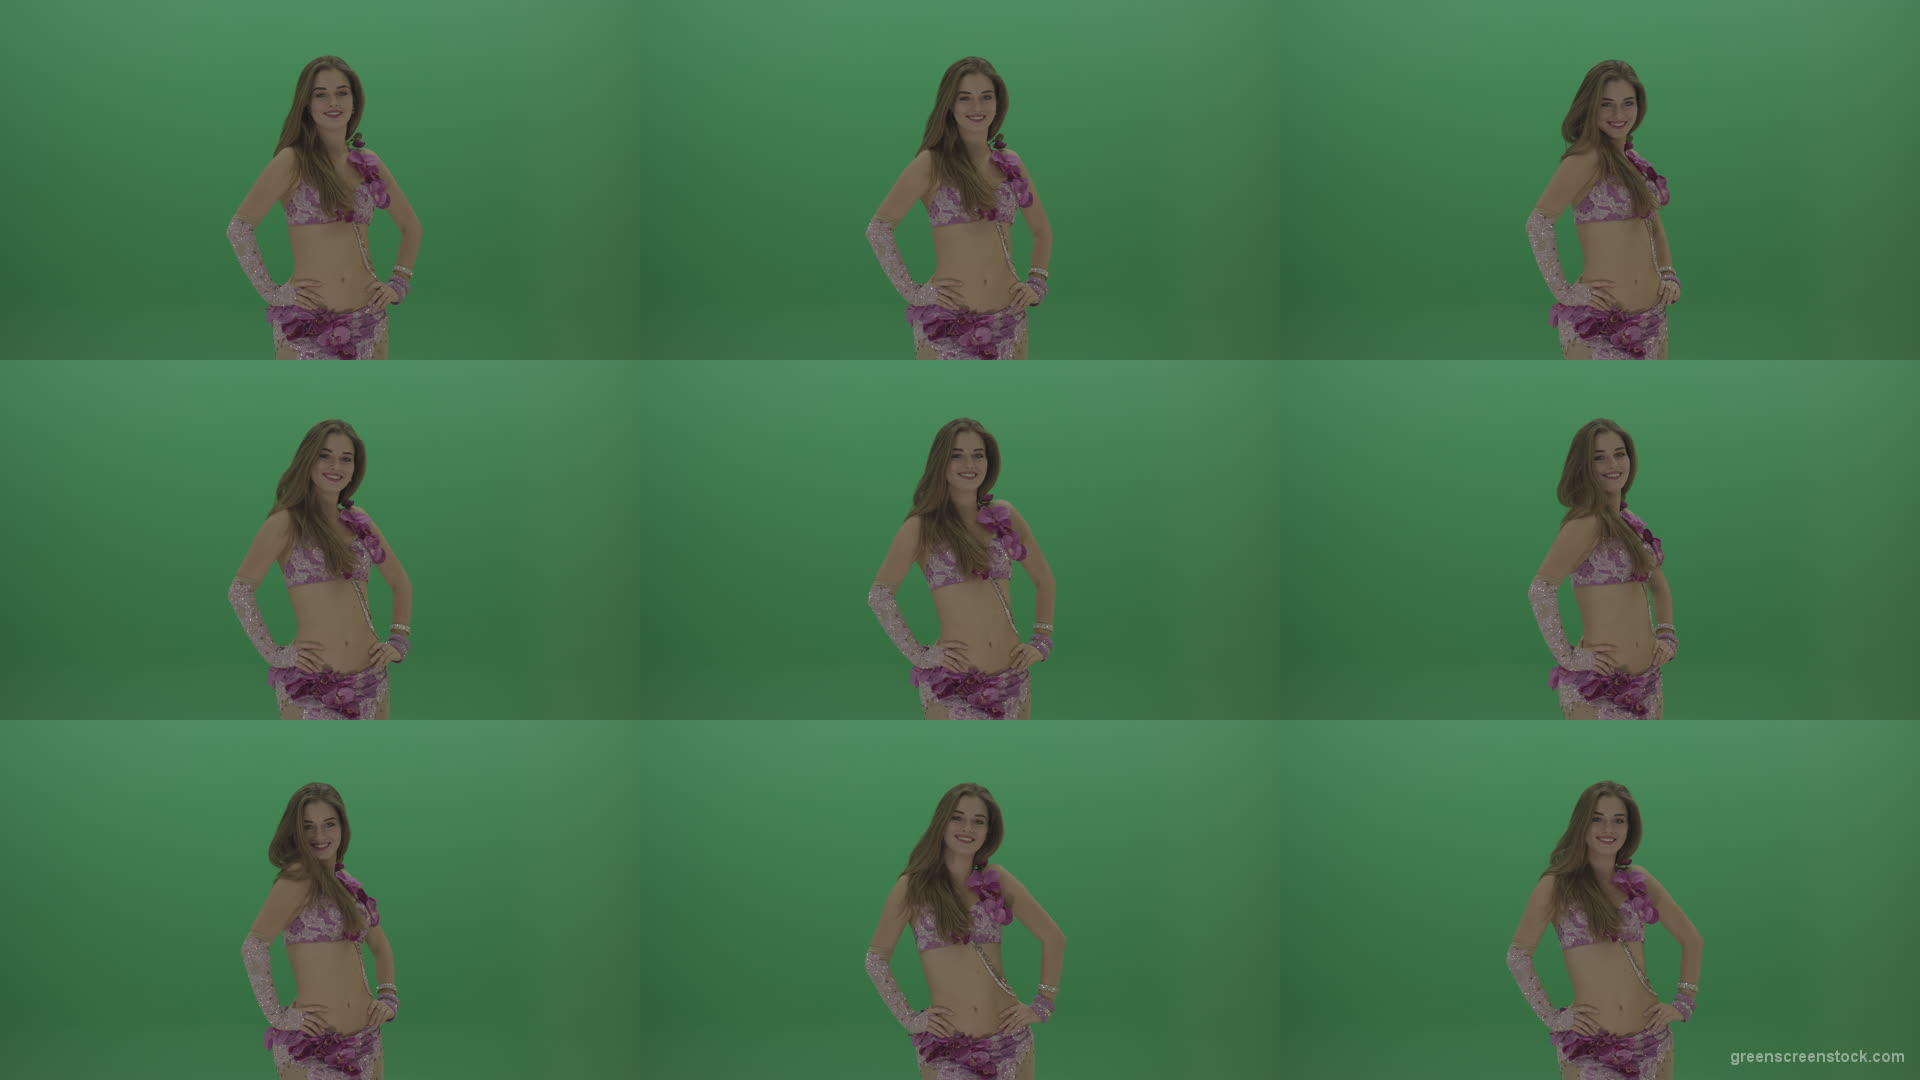 Beautiful-belly-dancer-in-purple-wear-winks-as-she-poses-over-green-screen-background Green Screen Stock